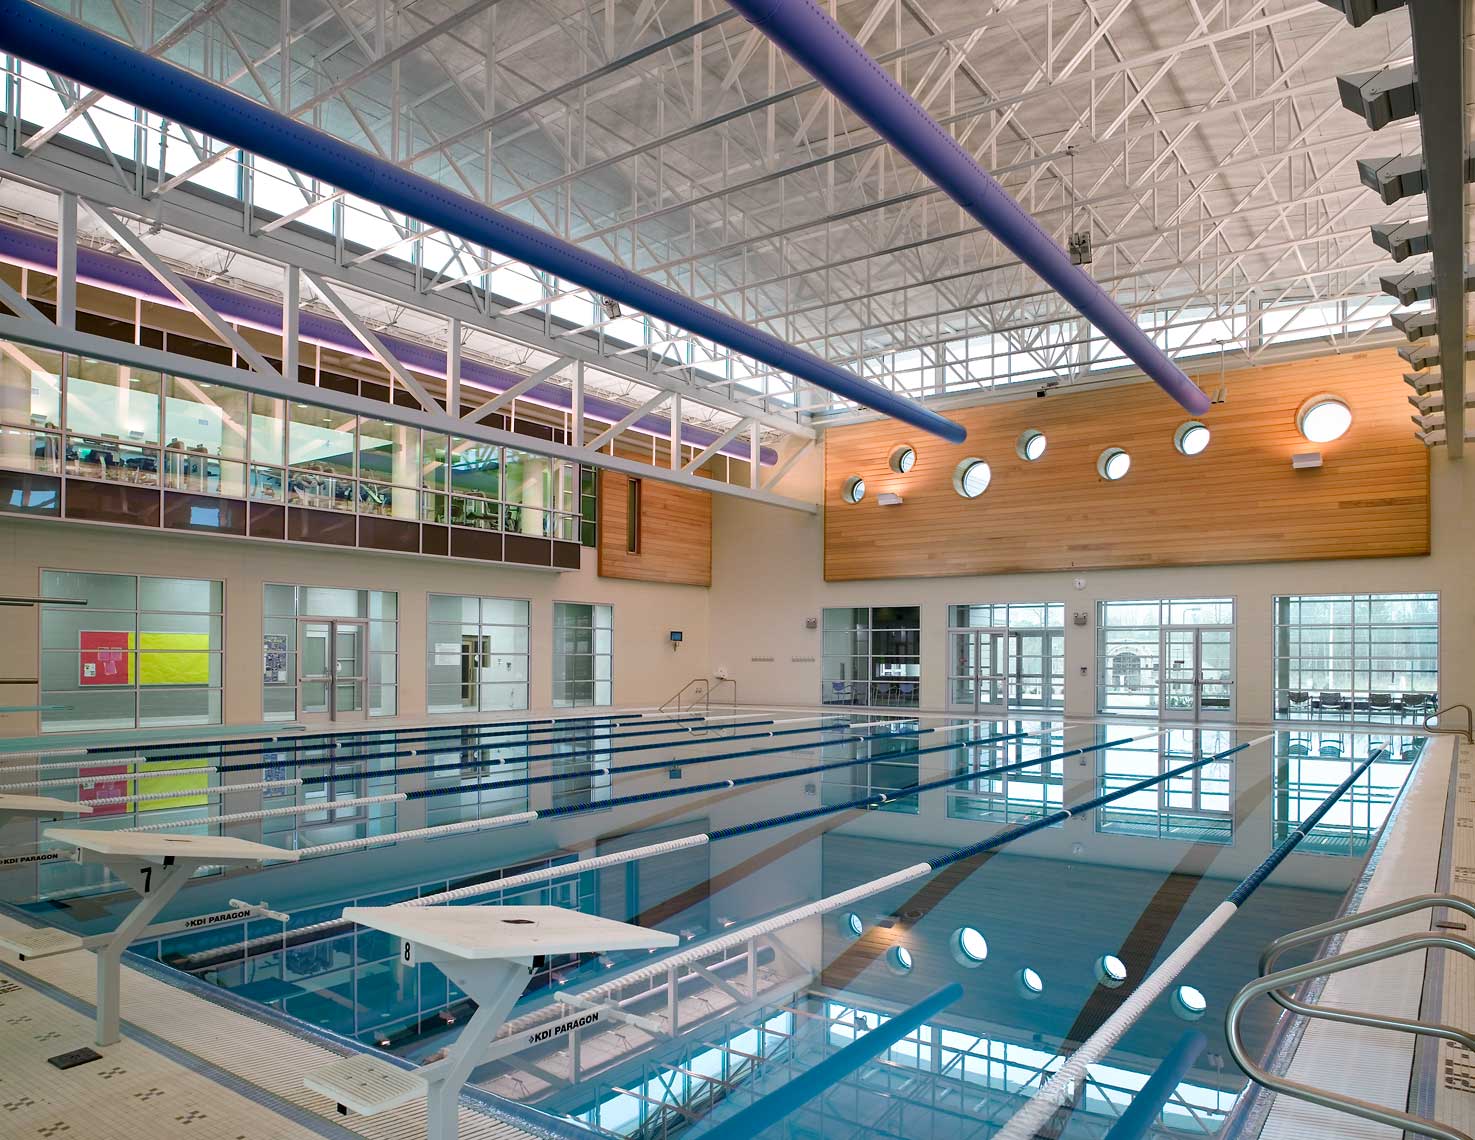 A natatorium view at the Summit Family YMCA